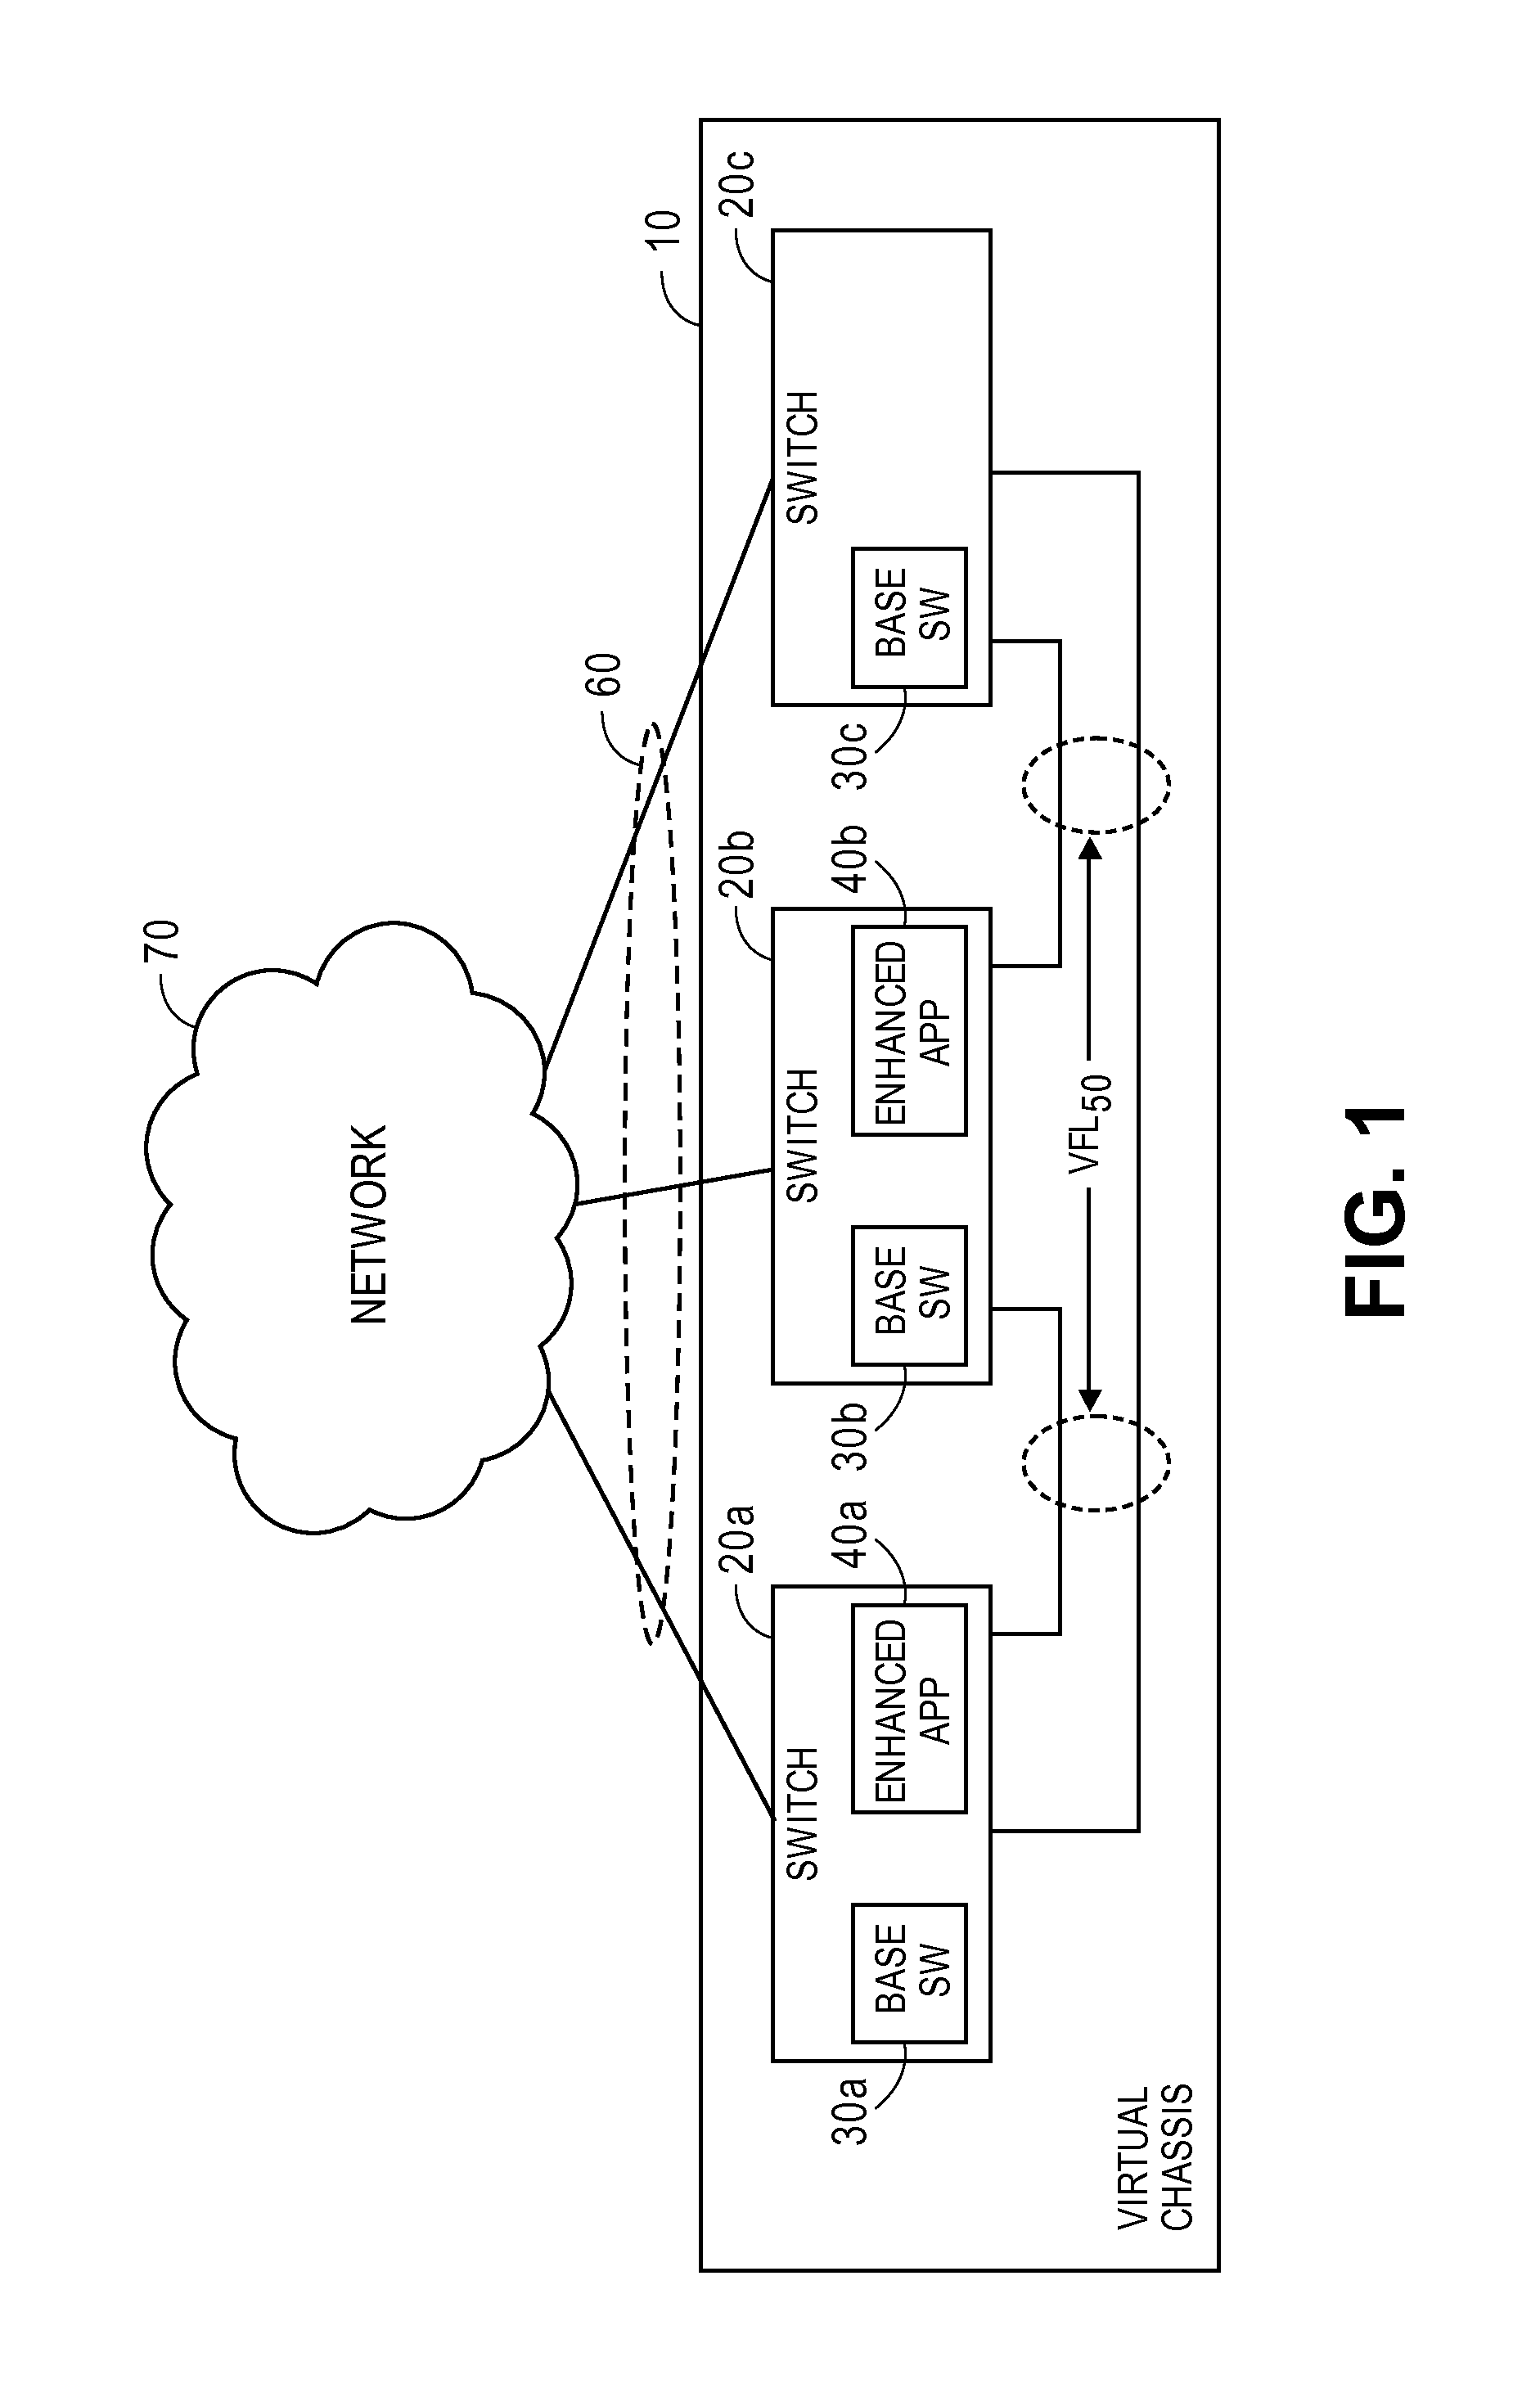 Layered Third Party Application Software Redundancy in a Non-Homogenous Virtual Chassis